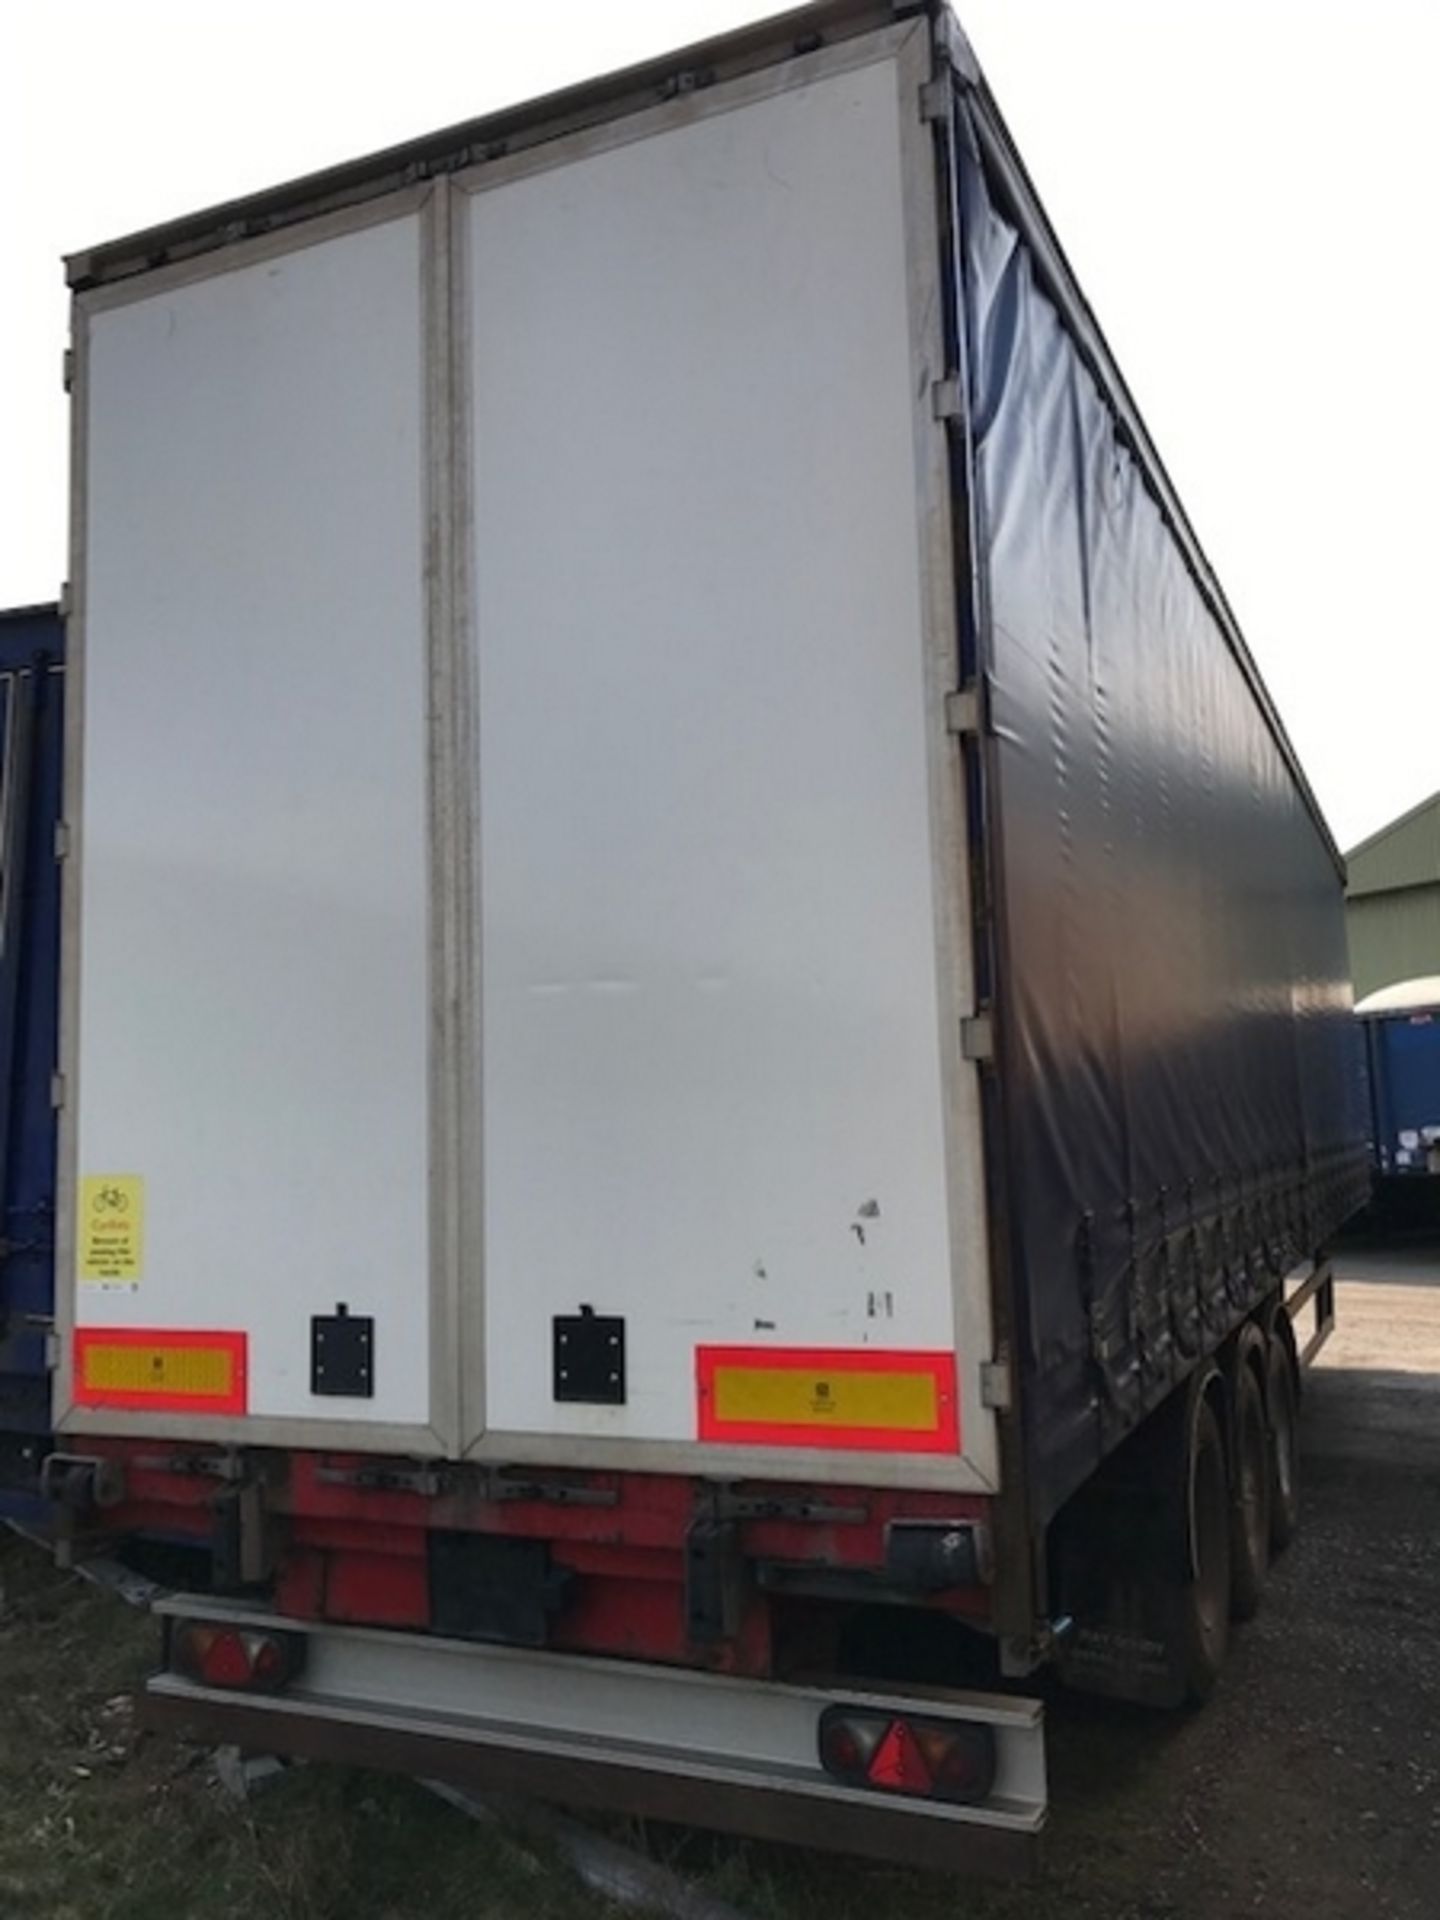 Montracon Curtainside Trailer Tri Axle - 50P20-1 - Image 5 of 6